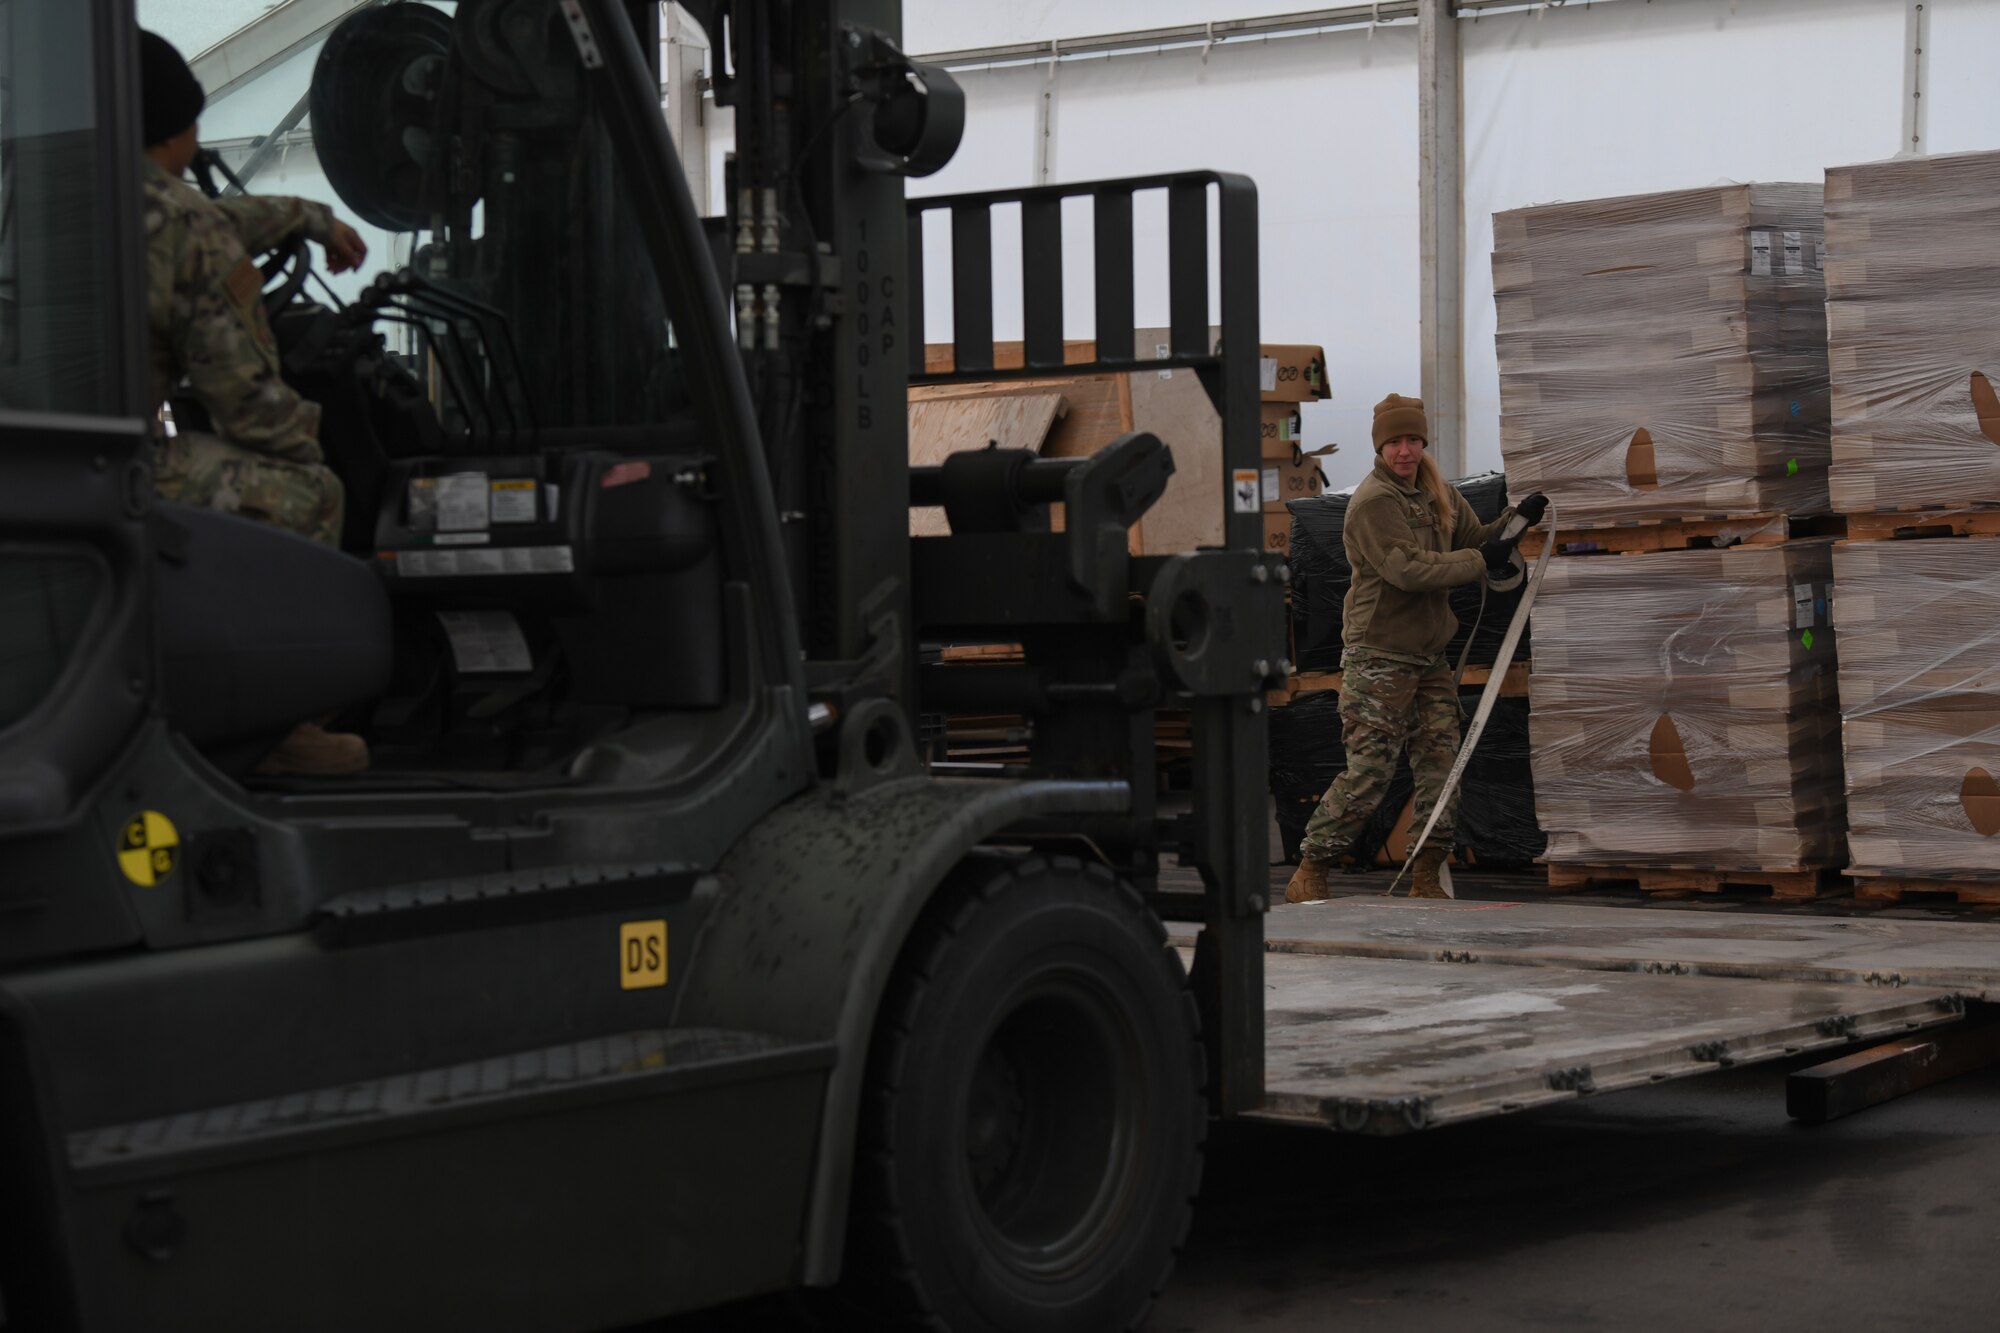 U.S. Air Force Staff Sgt. Holly Gibbs, 435th Air Expeditionary Wing air transportation craftsman, unstraps pallets from a 10K Standard Forklift at Ramstein Air Base, Germany, Jan 21, 2022. During a flood, tents for U.S. and allied service members were damaged at Nigerien Air Base 101 and 201, which required replacements. The 435th AEW ensures Airmen have the resources to support counter-violent extremist operations in Africa and meet the demands of assigned missions.(U.S. Air Force photo by Senior Airman Ericka A. Woolever)